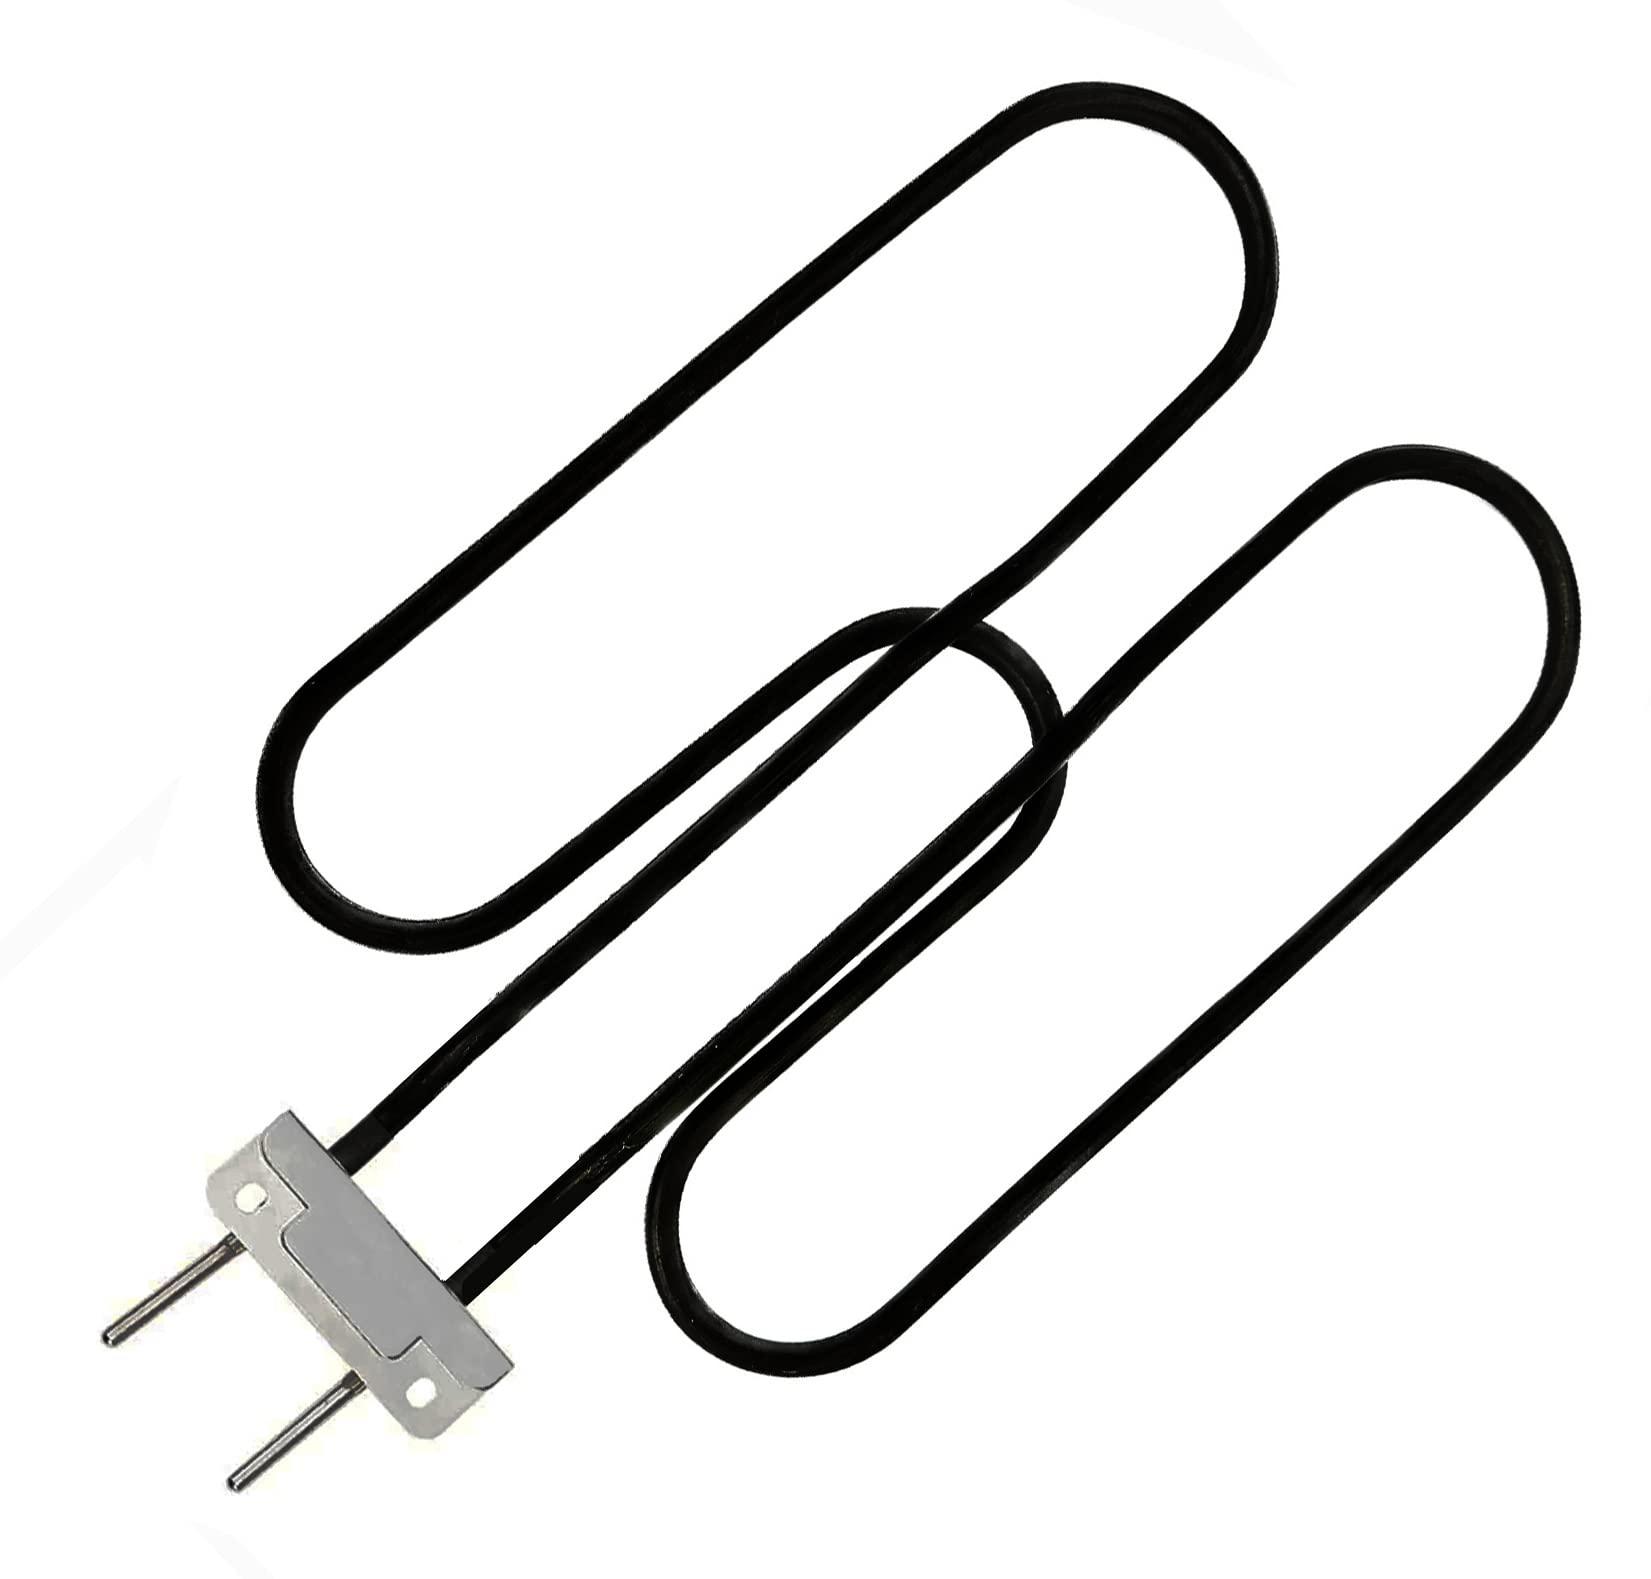 dayvlen electric grill heating element replacement part for weber 80342, 80343, 65620, q140, q1400 grills (8" w x 15 3/4" l)